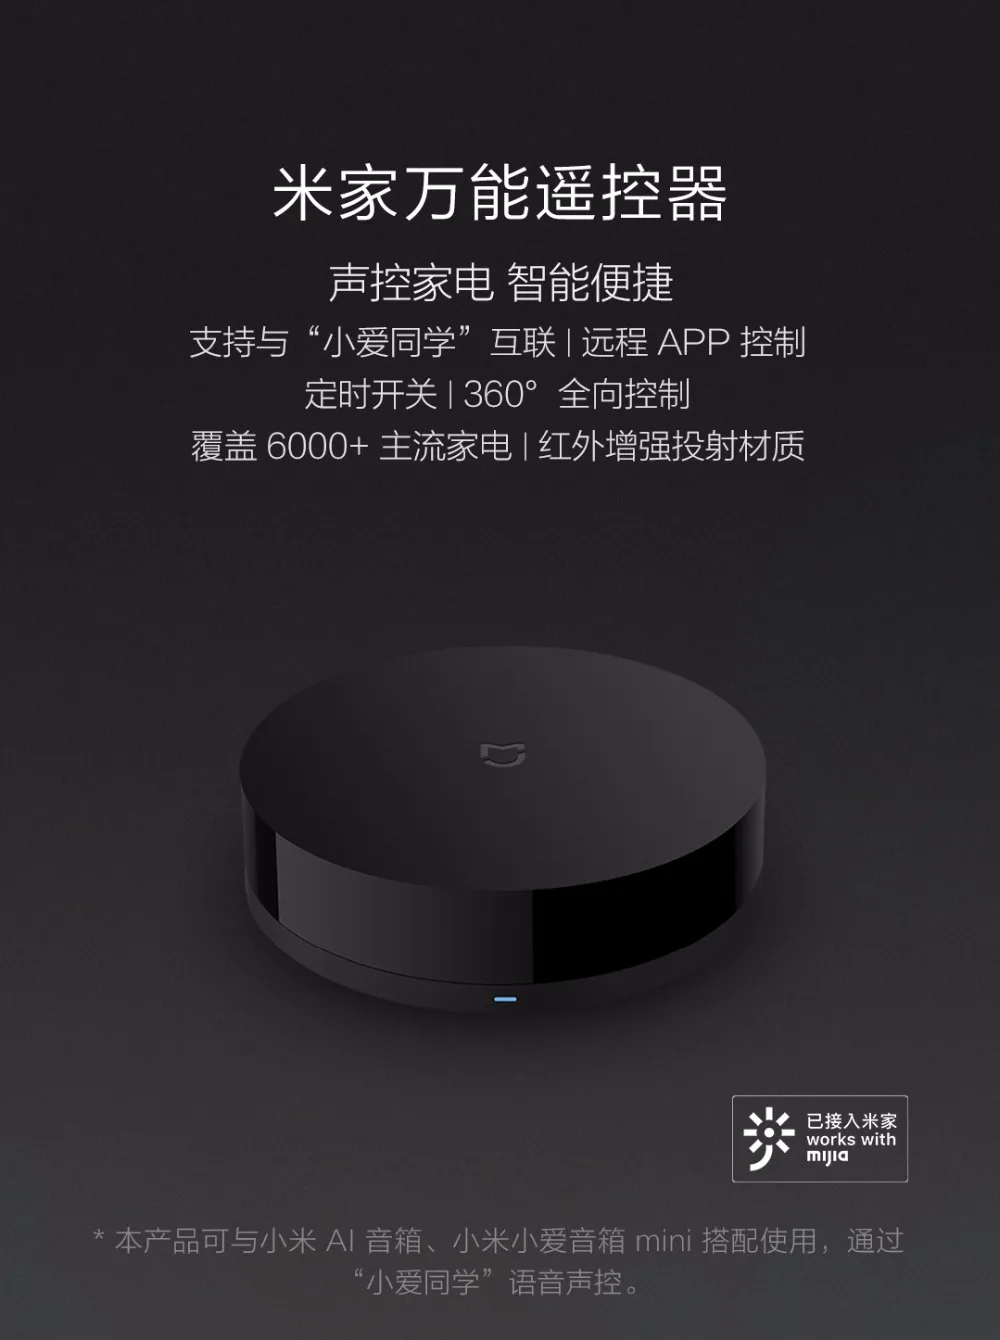 2019 Update Xiaomi Universal Infrared Remote Controller Versatile Wifi Control For IR Home Appliance Air Conditioner Warmer TV (12)